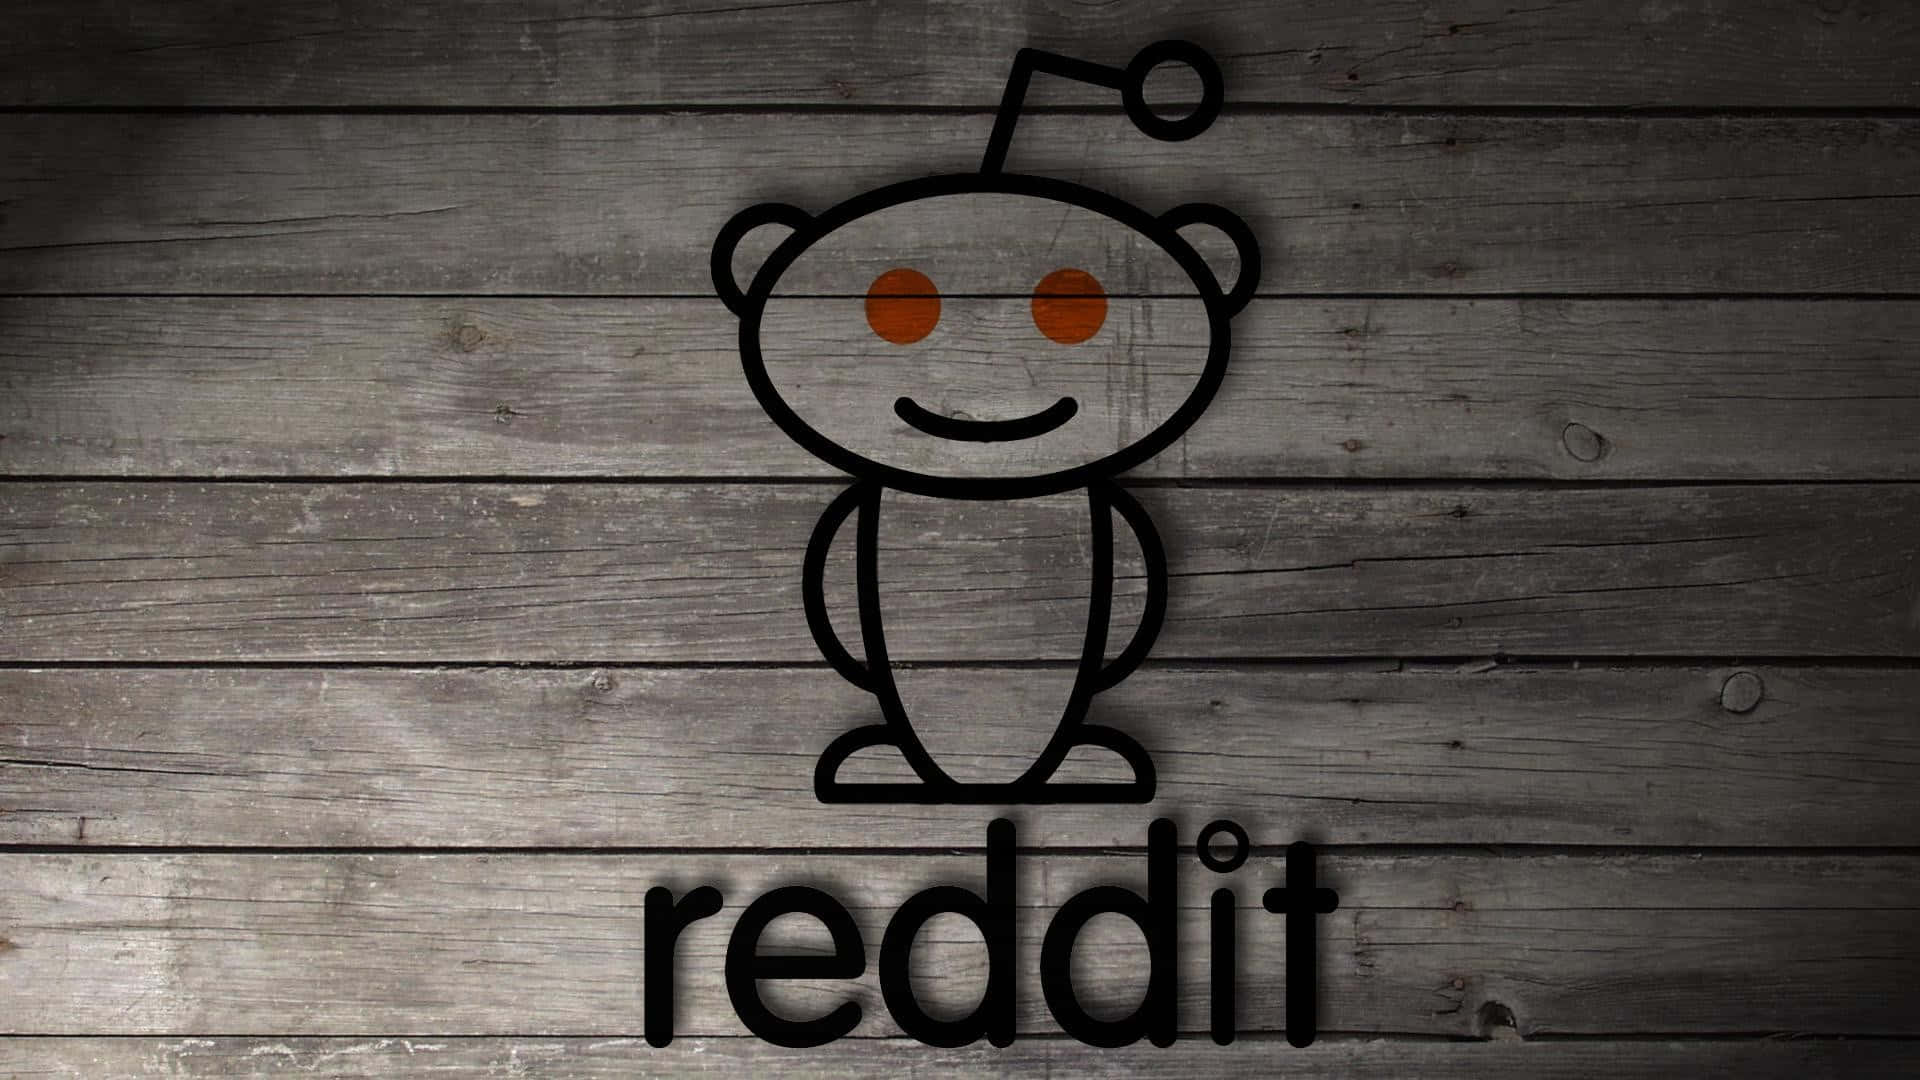 "Share your thoughts and ideas on Reddit!"